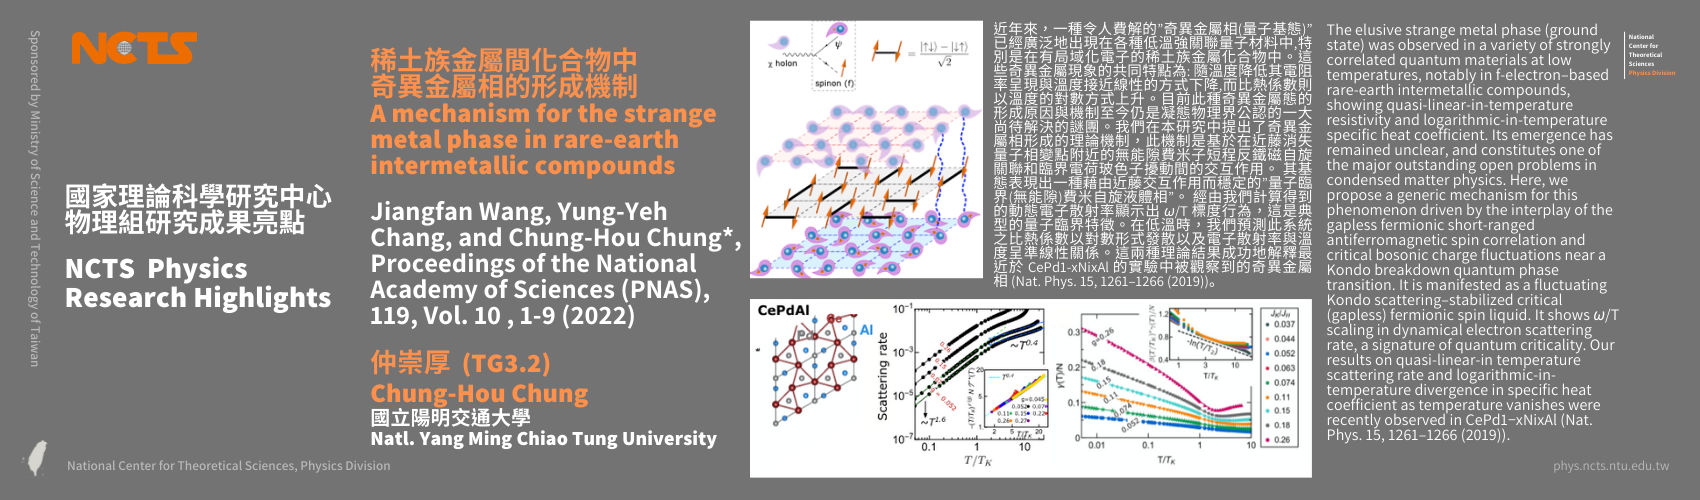 NCTS Physics Research Highlights - Chung-Hou Chung 'A mechanism for the strange metal phase in rare-earth intermetallic compounds', Proceedings of the National Academy of Sciences (PNAS) (2022)